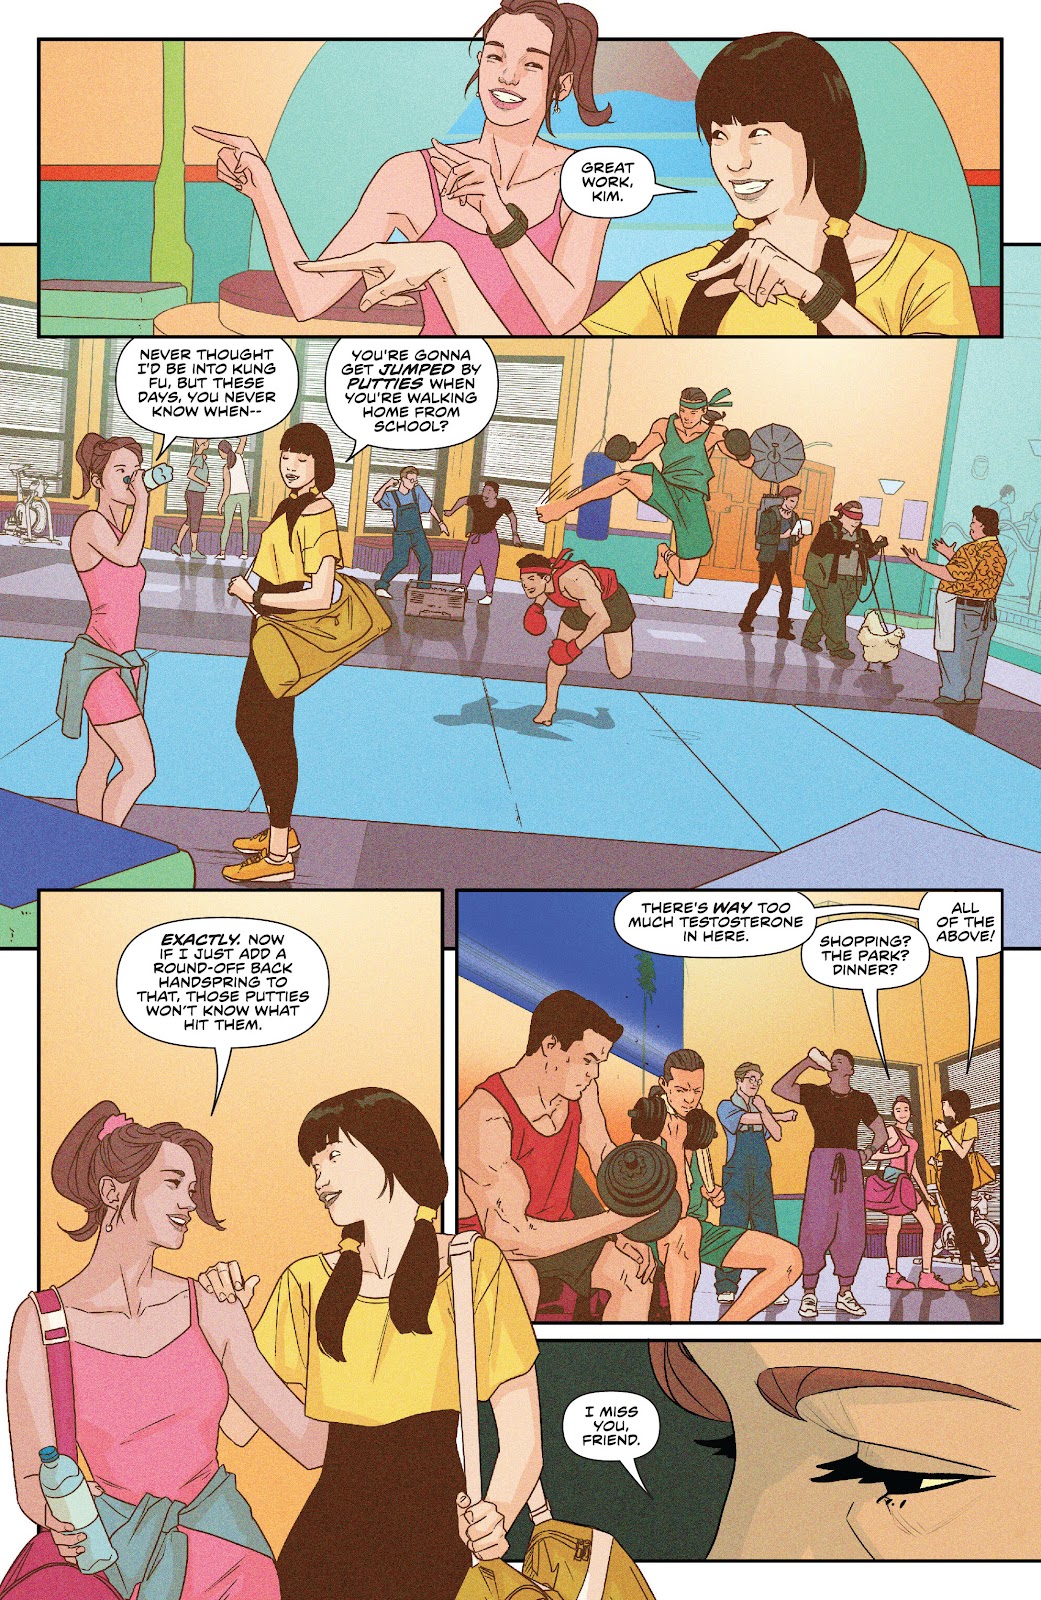 Mighty Morphin Power Rangers: The Return issue 1 - Page 10